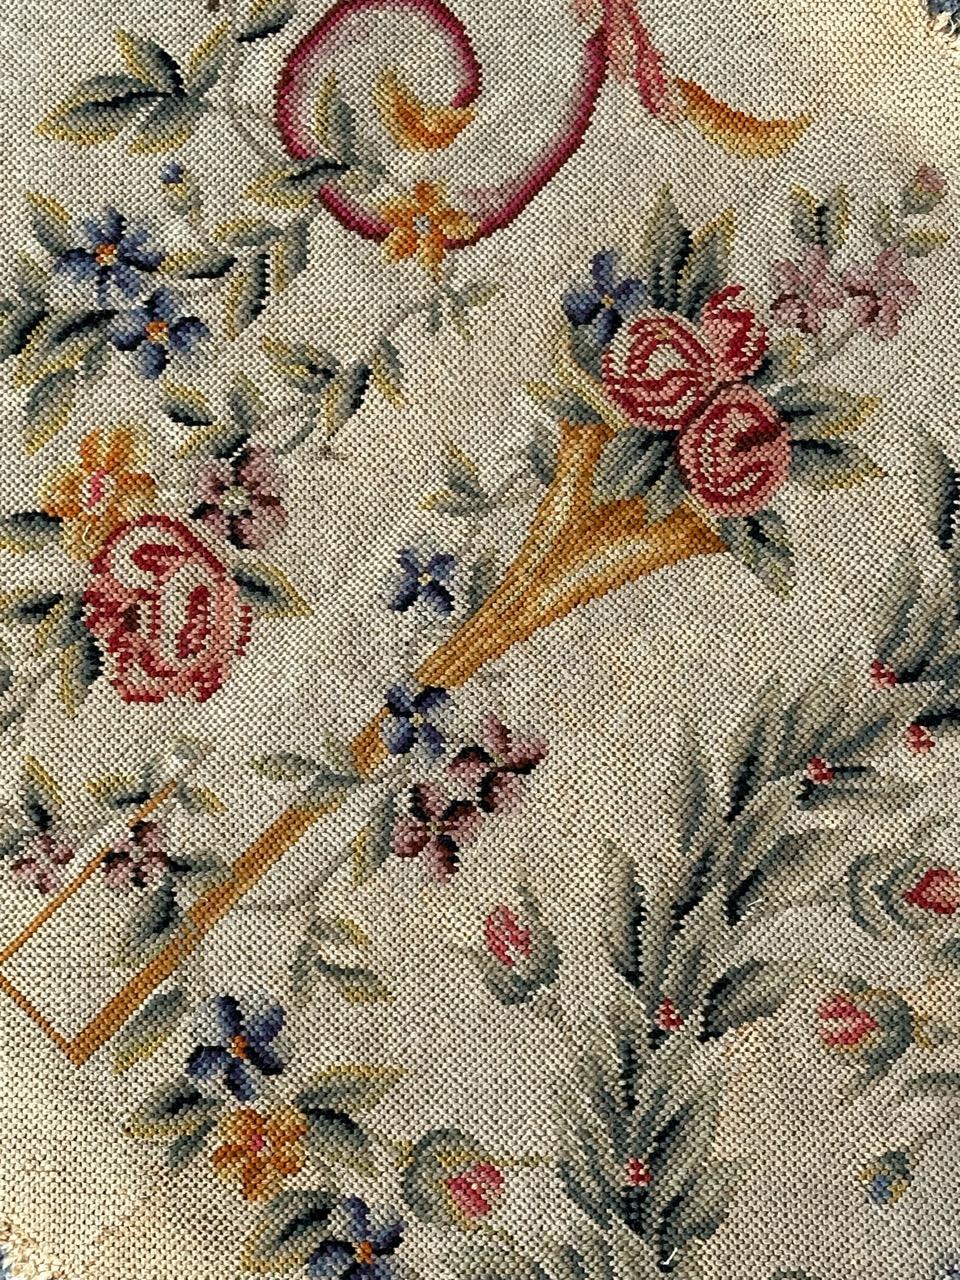 Bobyrug's pretty antique French needlepoint chair cover tapestry  en vente 10